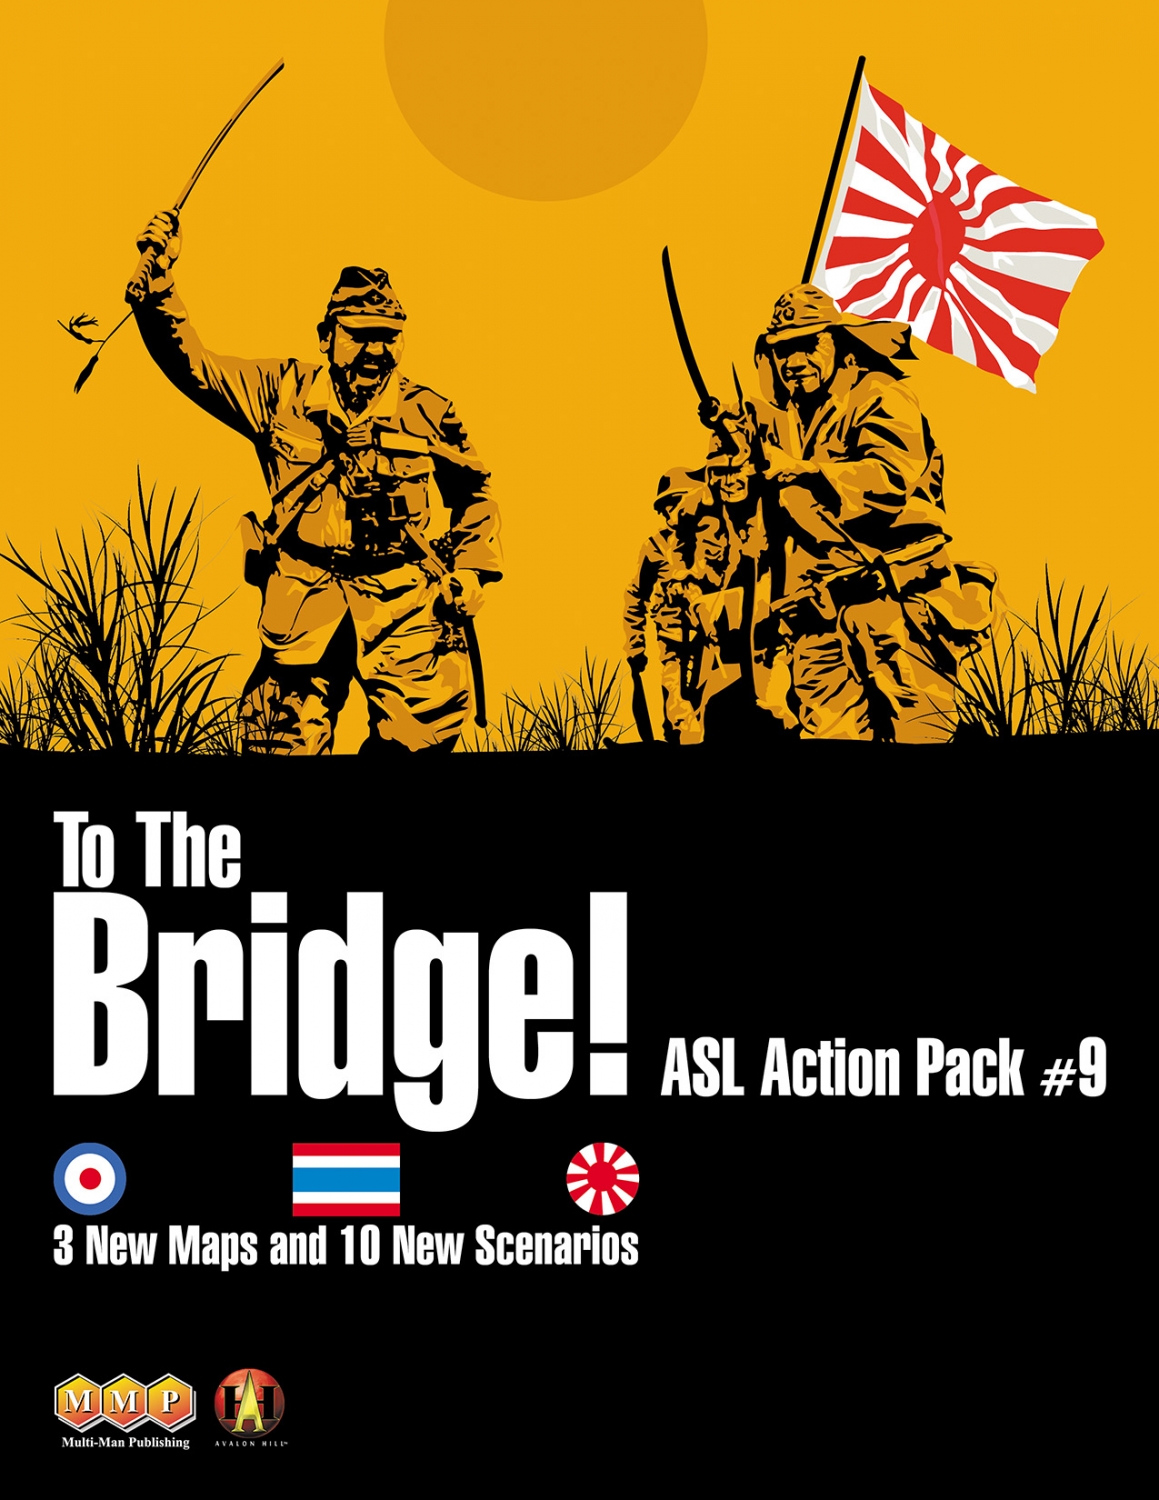 ASL Action Pack #9 - To The Bridge!